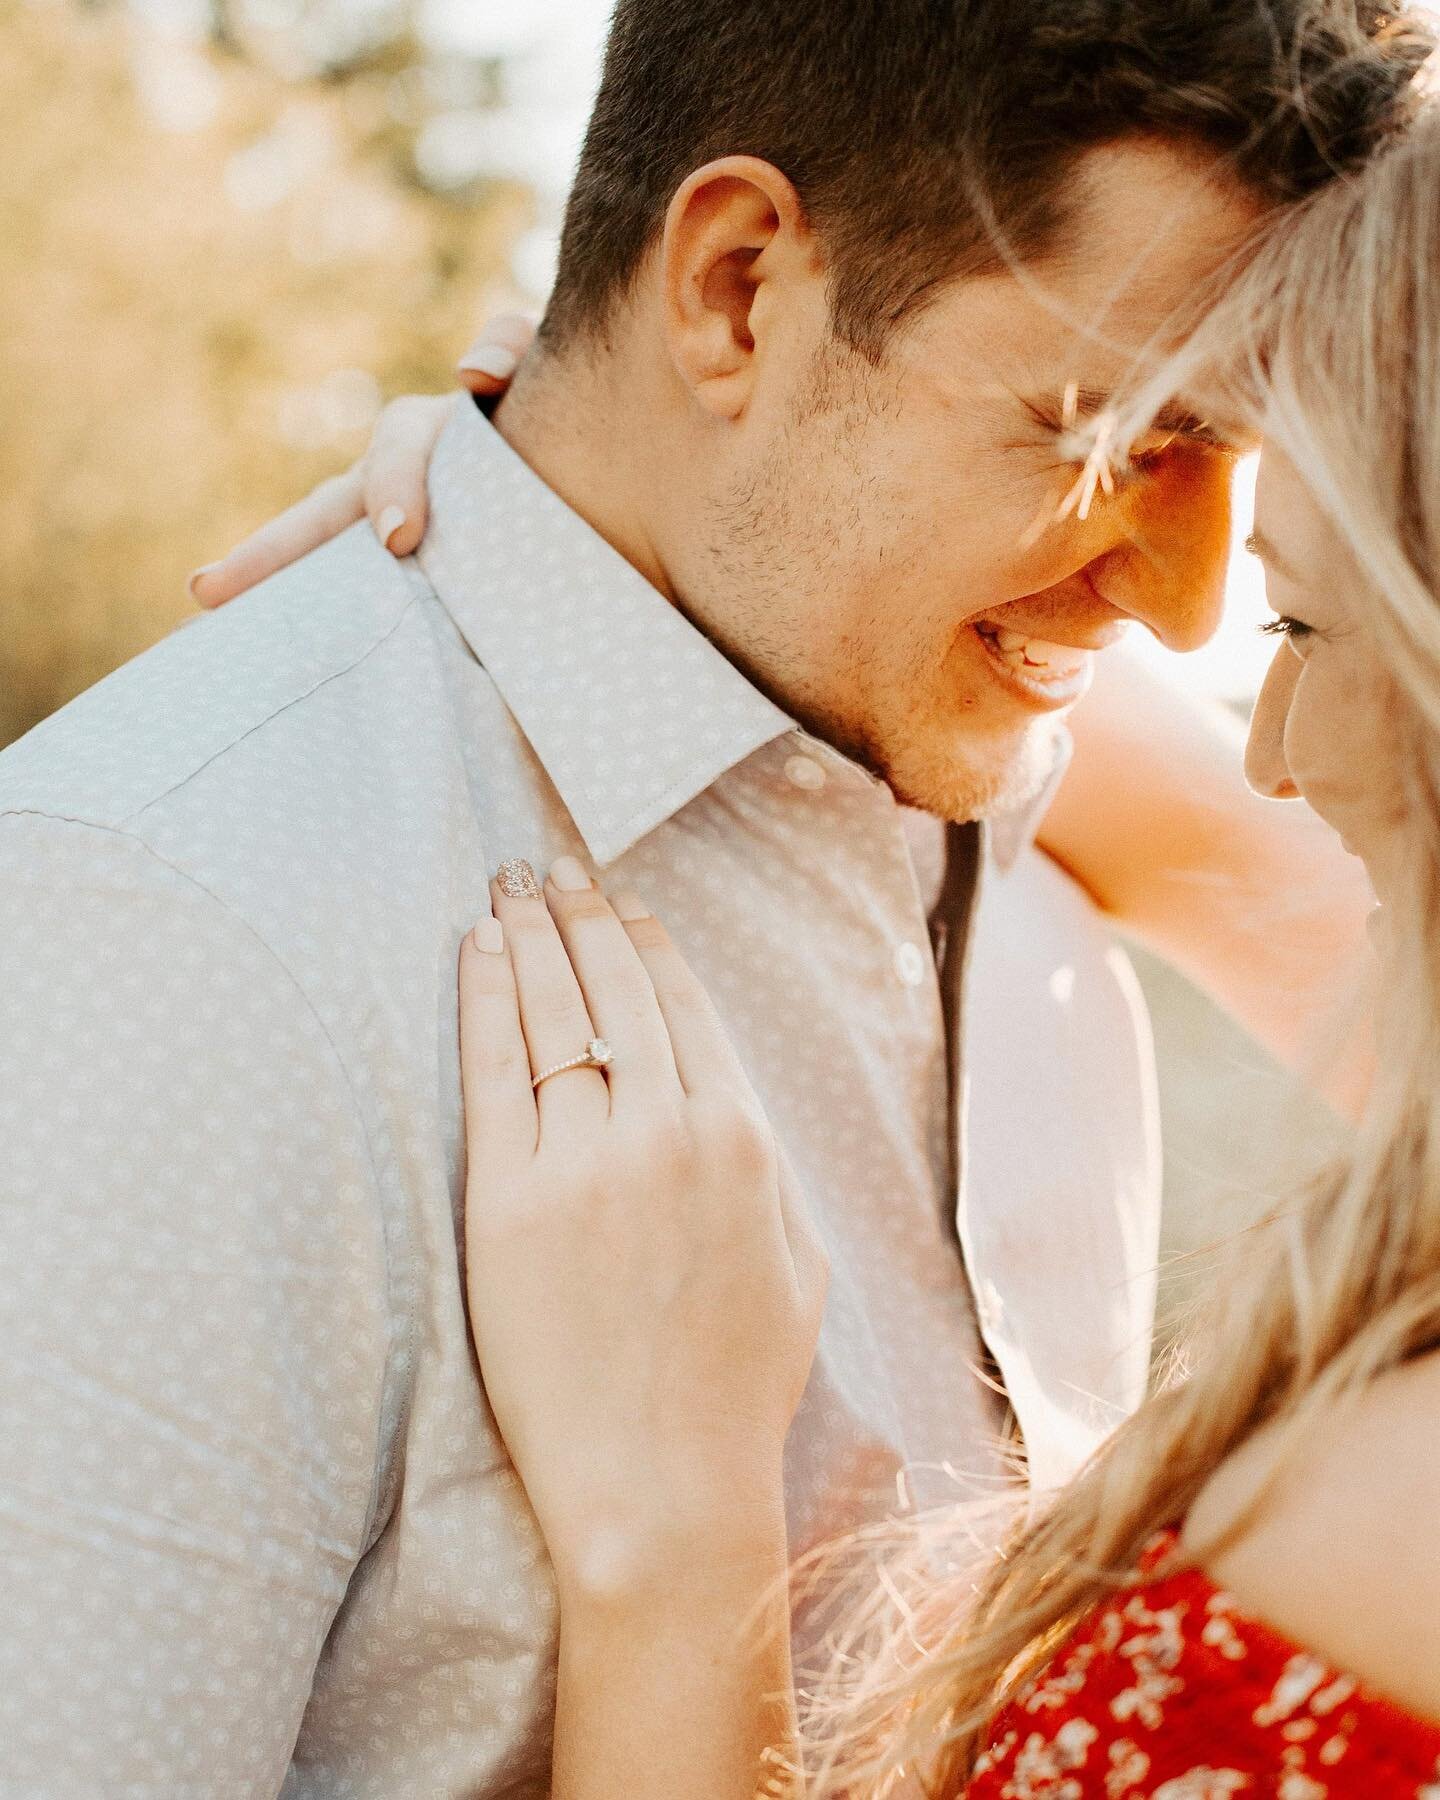 It was so fun meeting Erin + Tim! Their session just made me even more excited for their wedding date 😍 I love meeting y&rsquo;all before your big day!⁣
⁣
Also.. nothing beats golden hour lighting! ⁣
⁣
⁣
⁣
⁣
⁣
_______________⁣⁣
#tlucasphotography #p